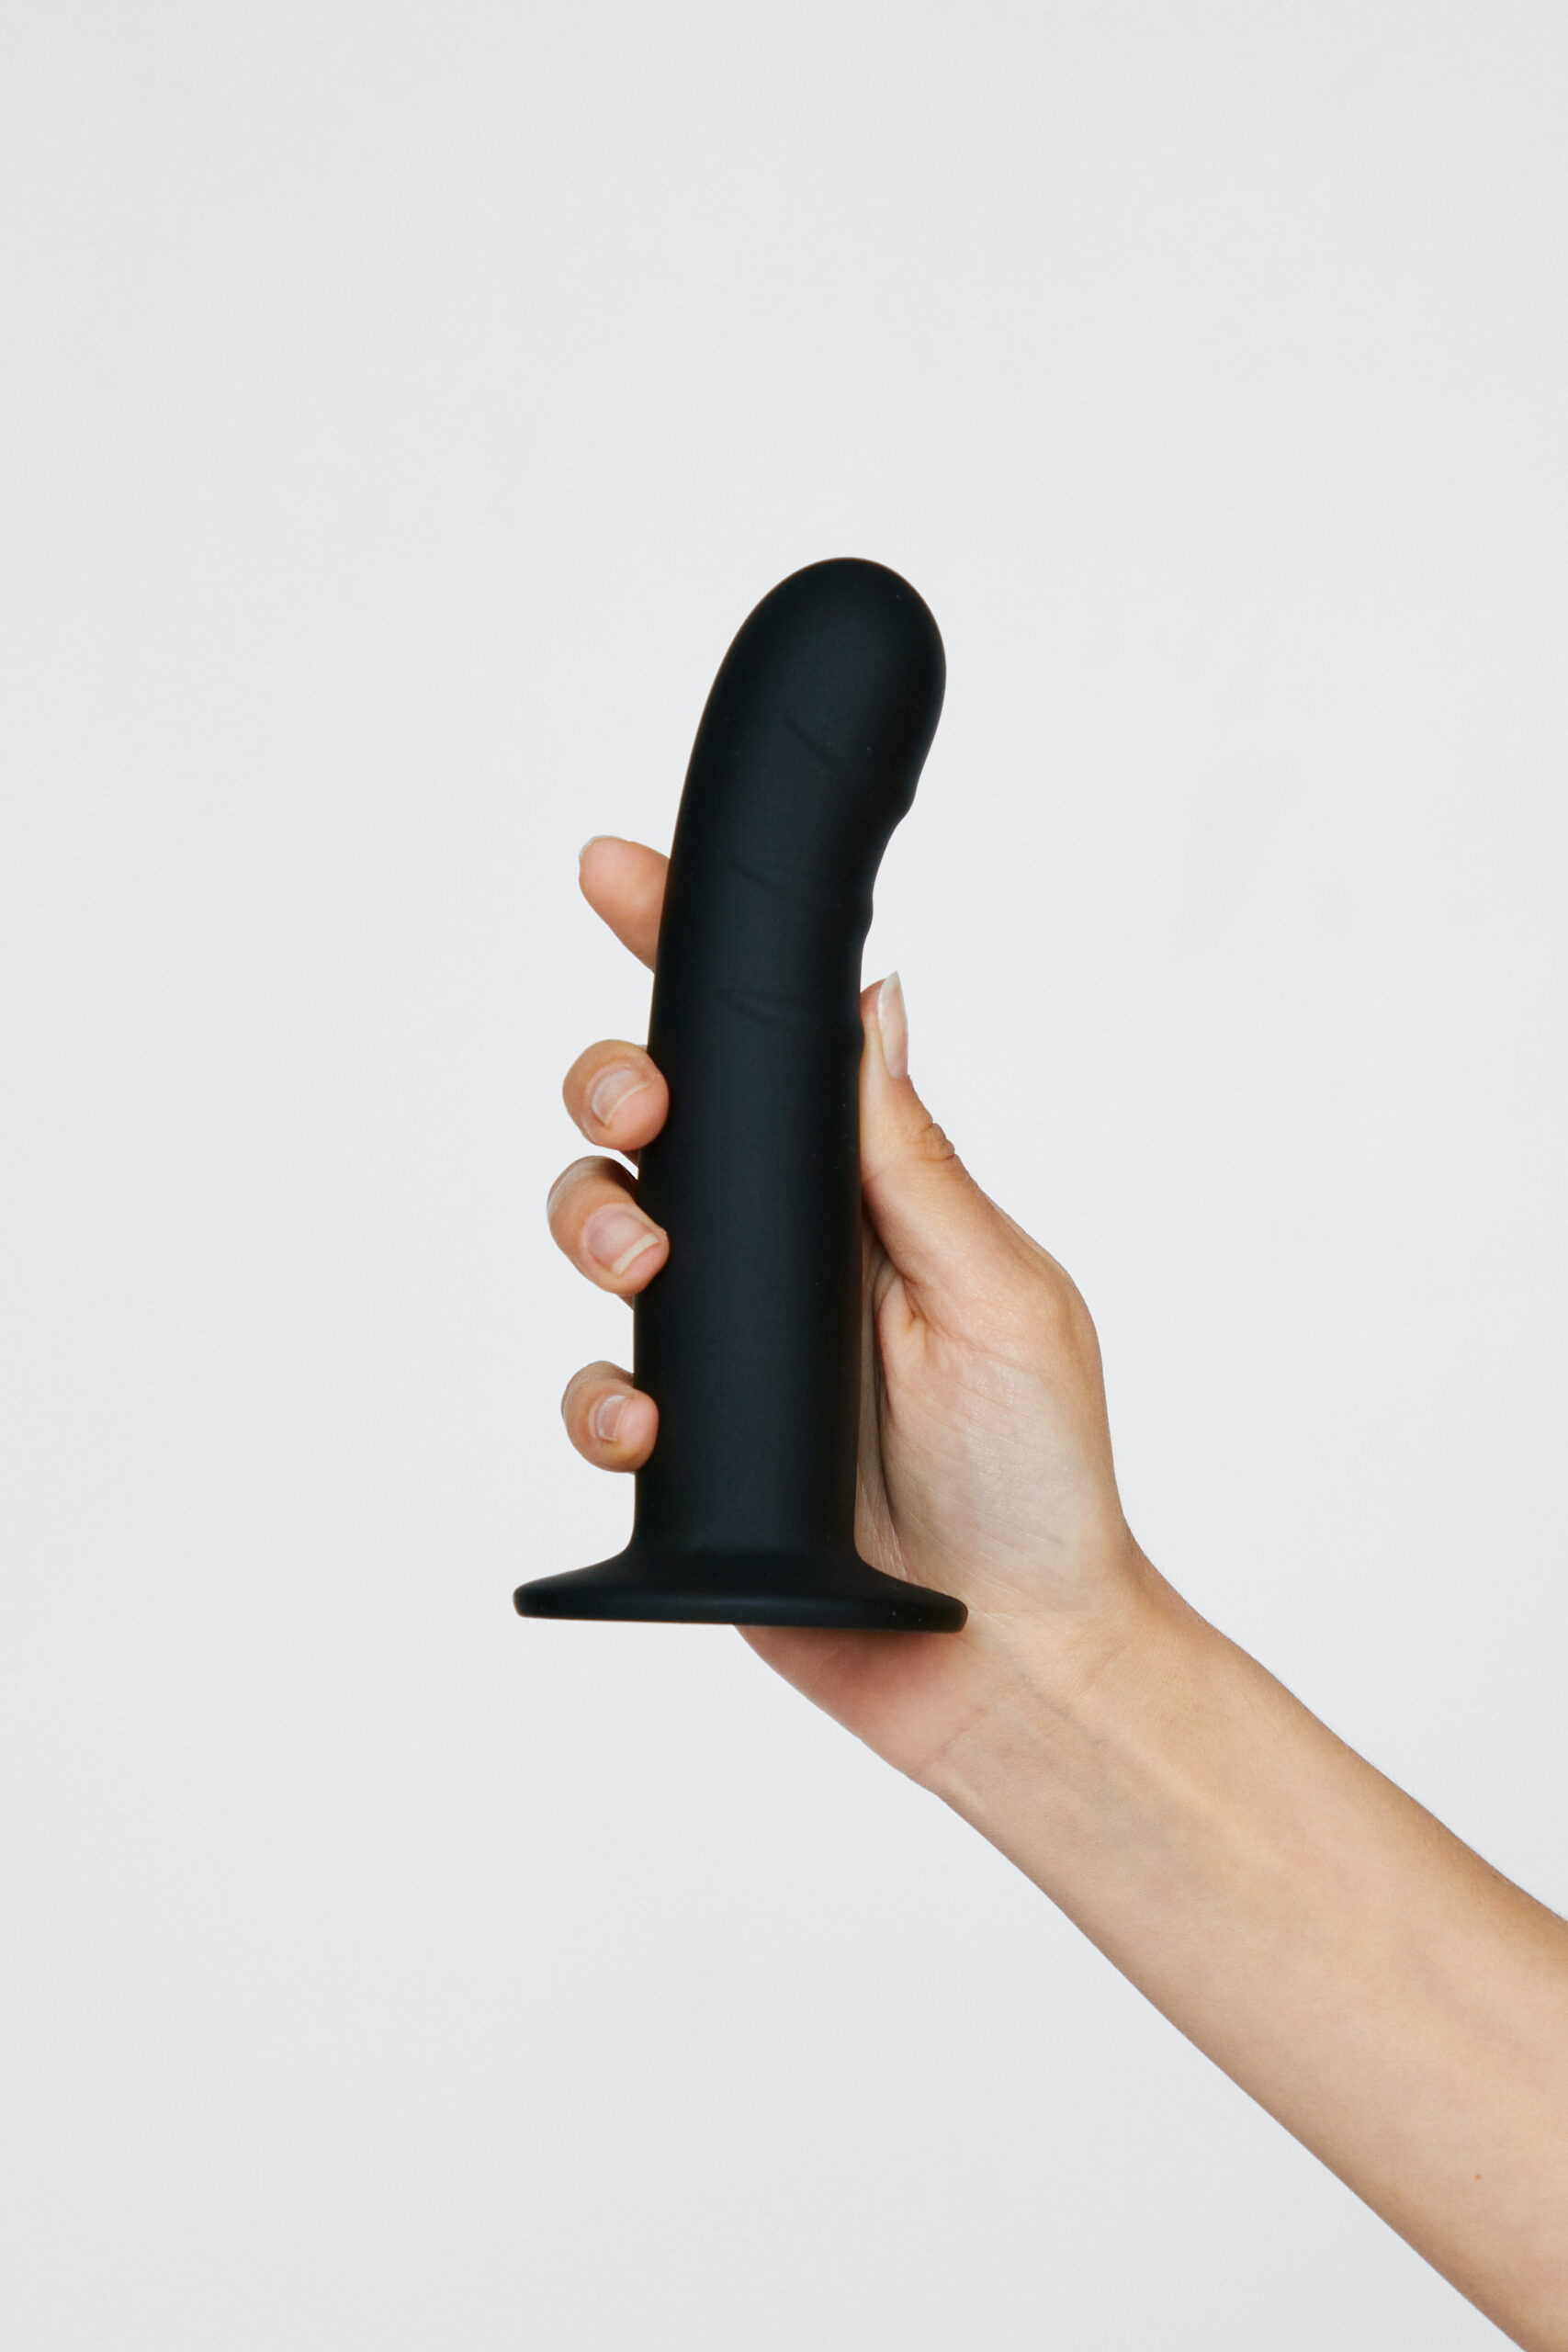 Give It To Me Large Dildo